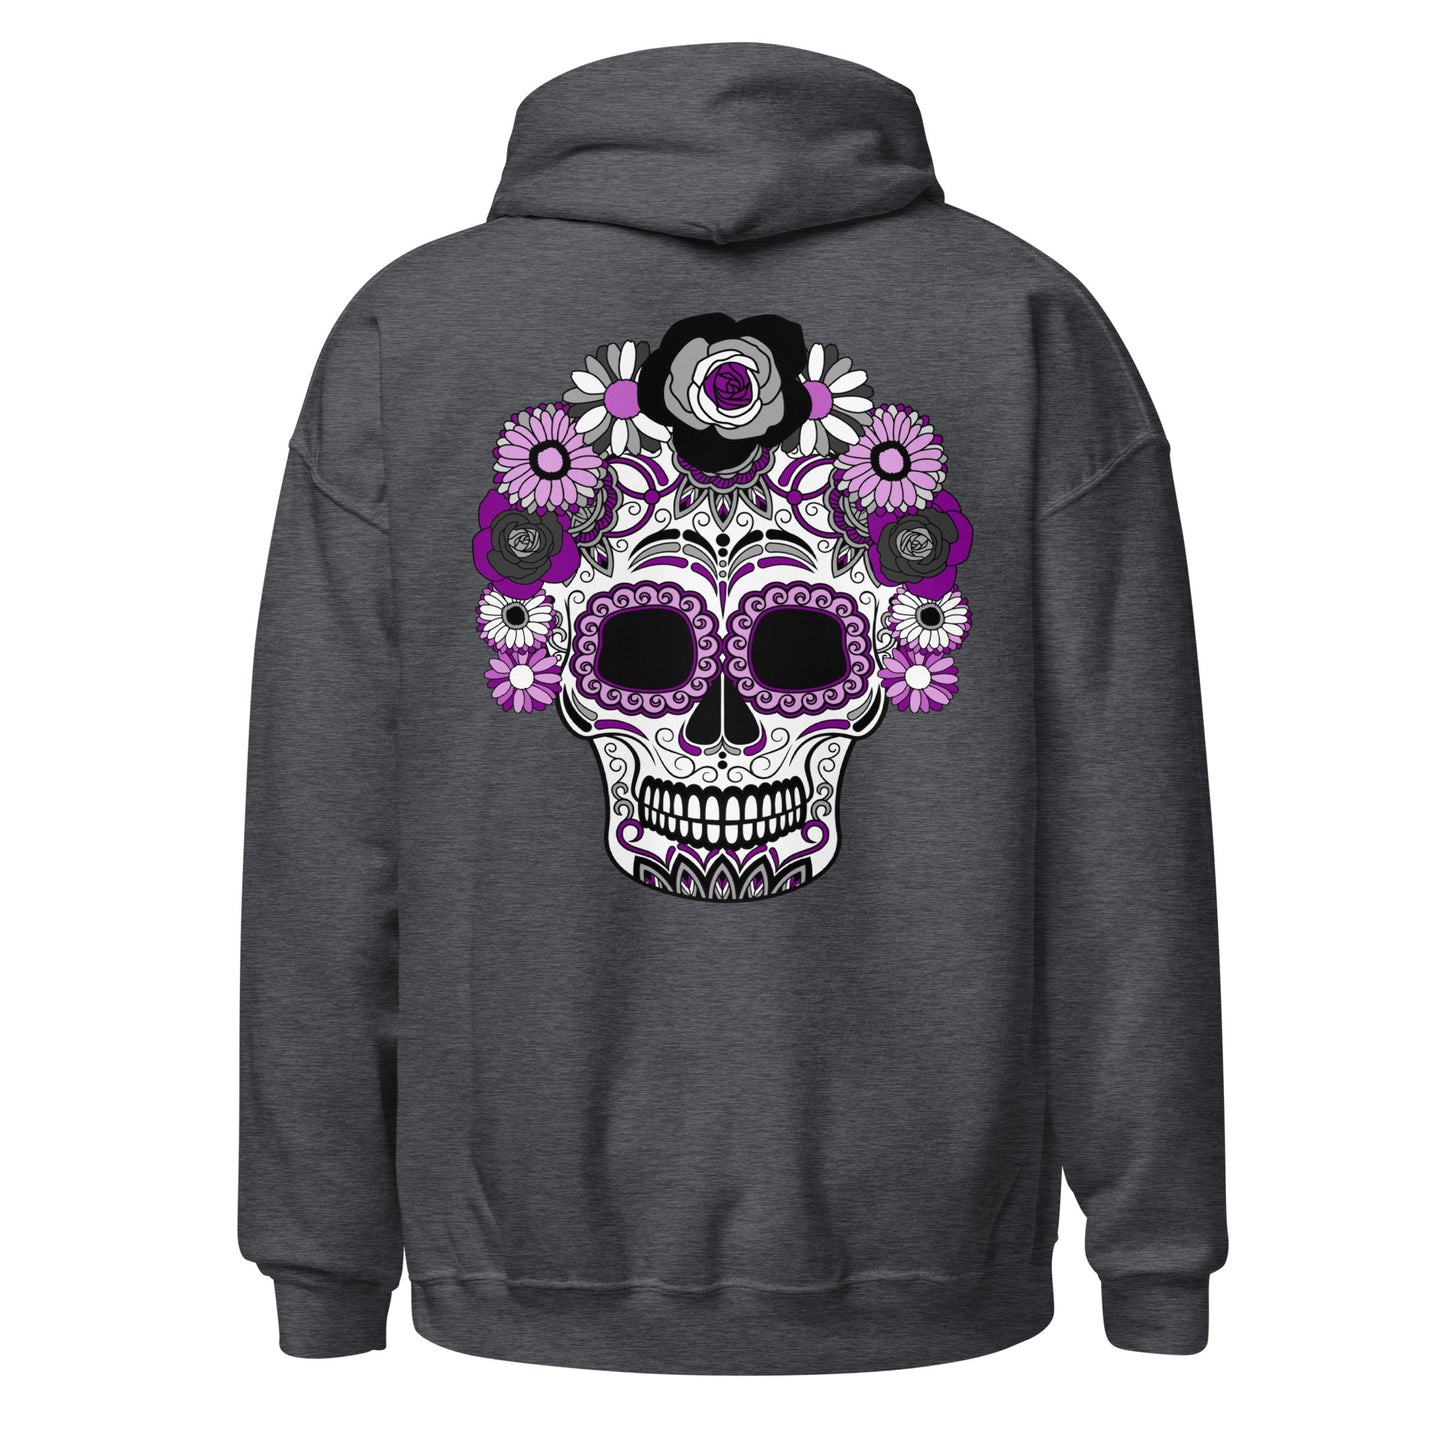 Asexual Day of the Dead Mask Hoodie Sweatshirt